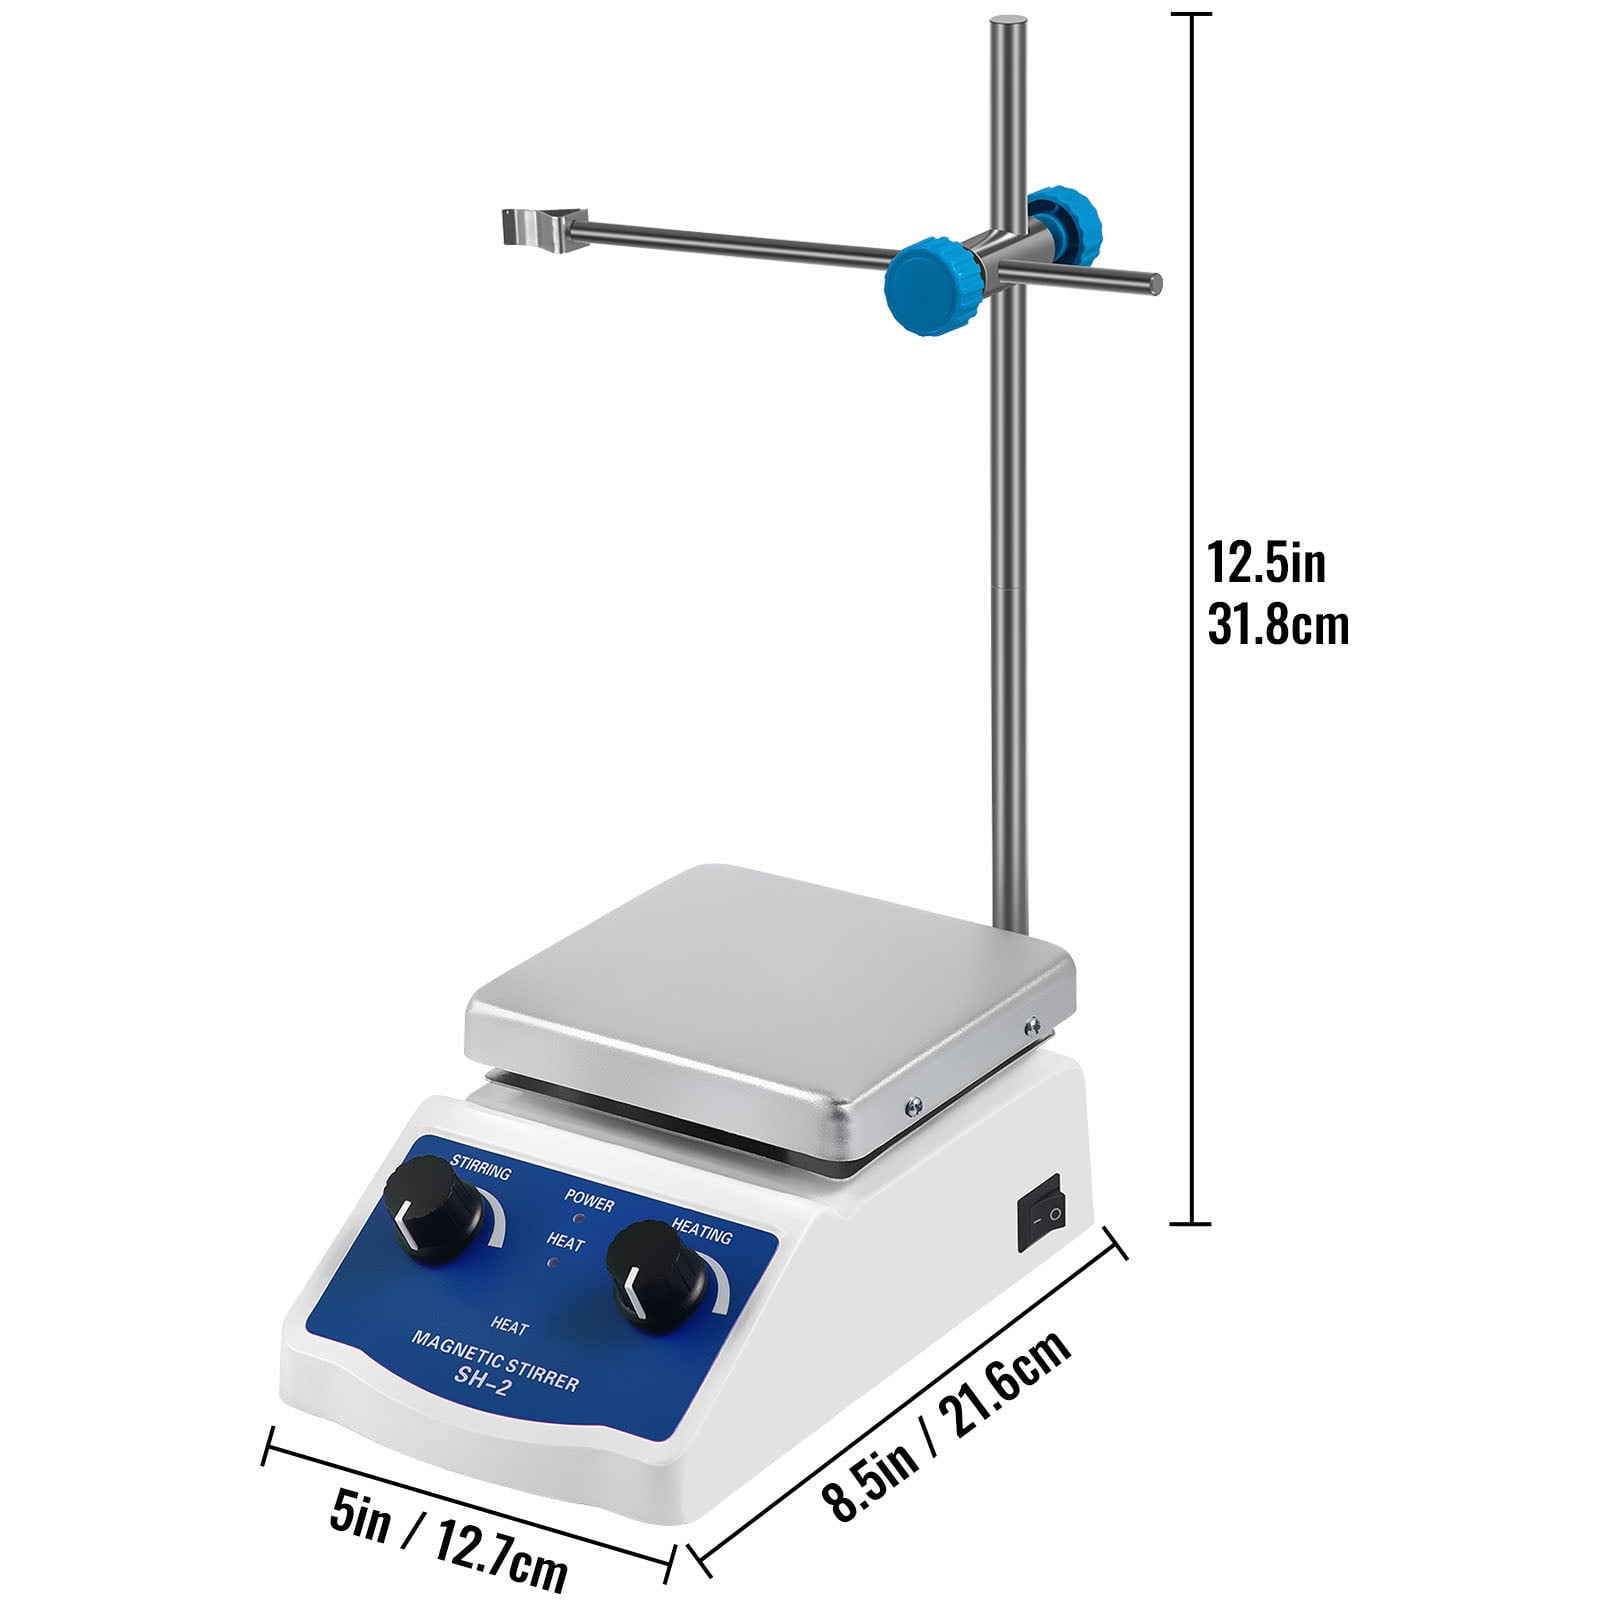 SH-2 Hot Plate Magnetic Stirrer Mixer Dual Control with 1 inch Stir Ba